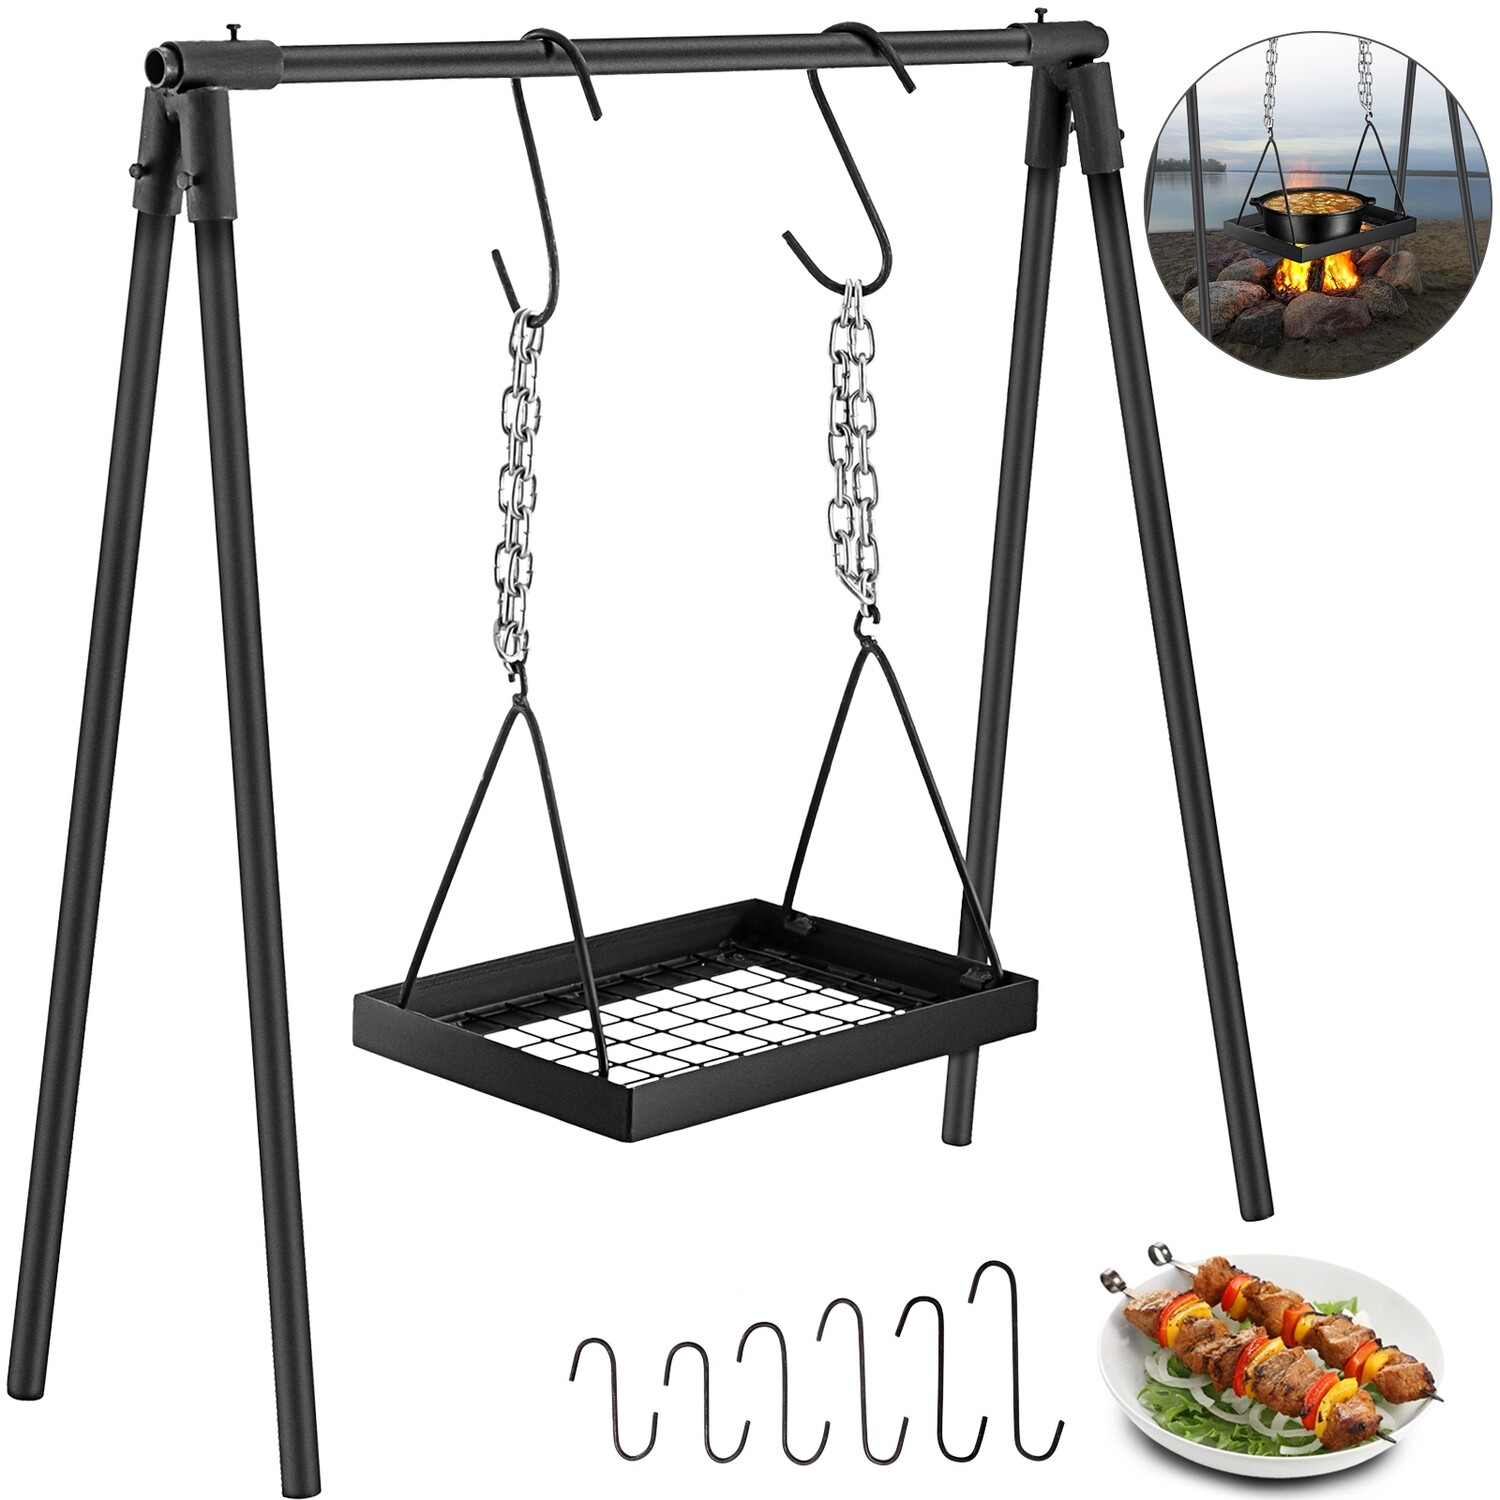 Outdoor Cooking Cabon Steel Campfire Cooking Equipment, Campfire Cooking Stand